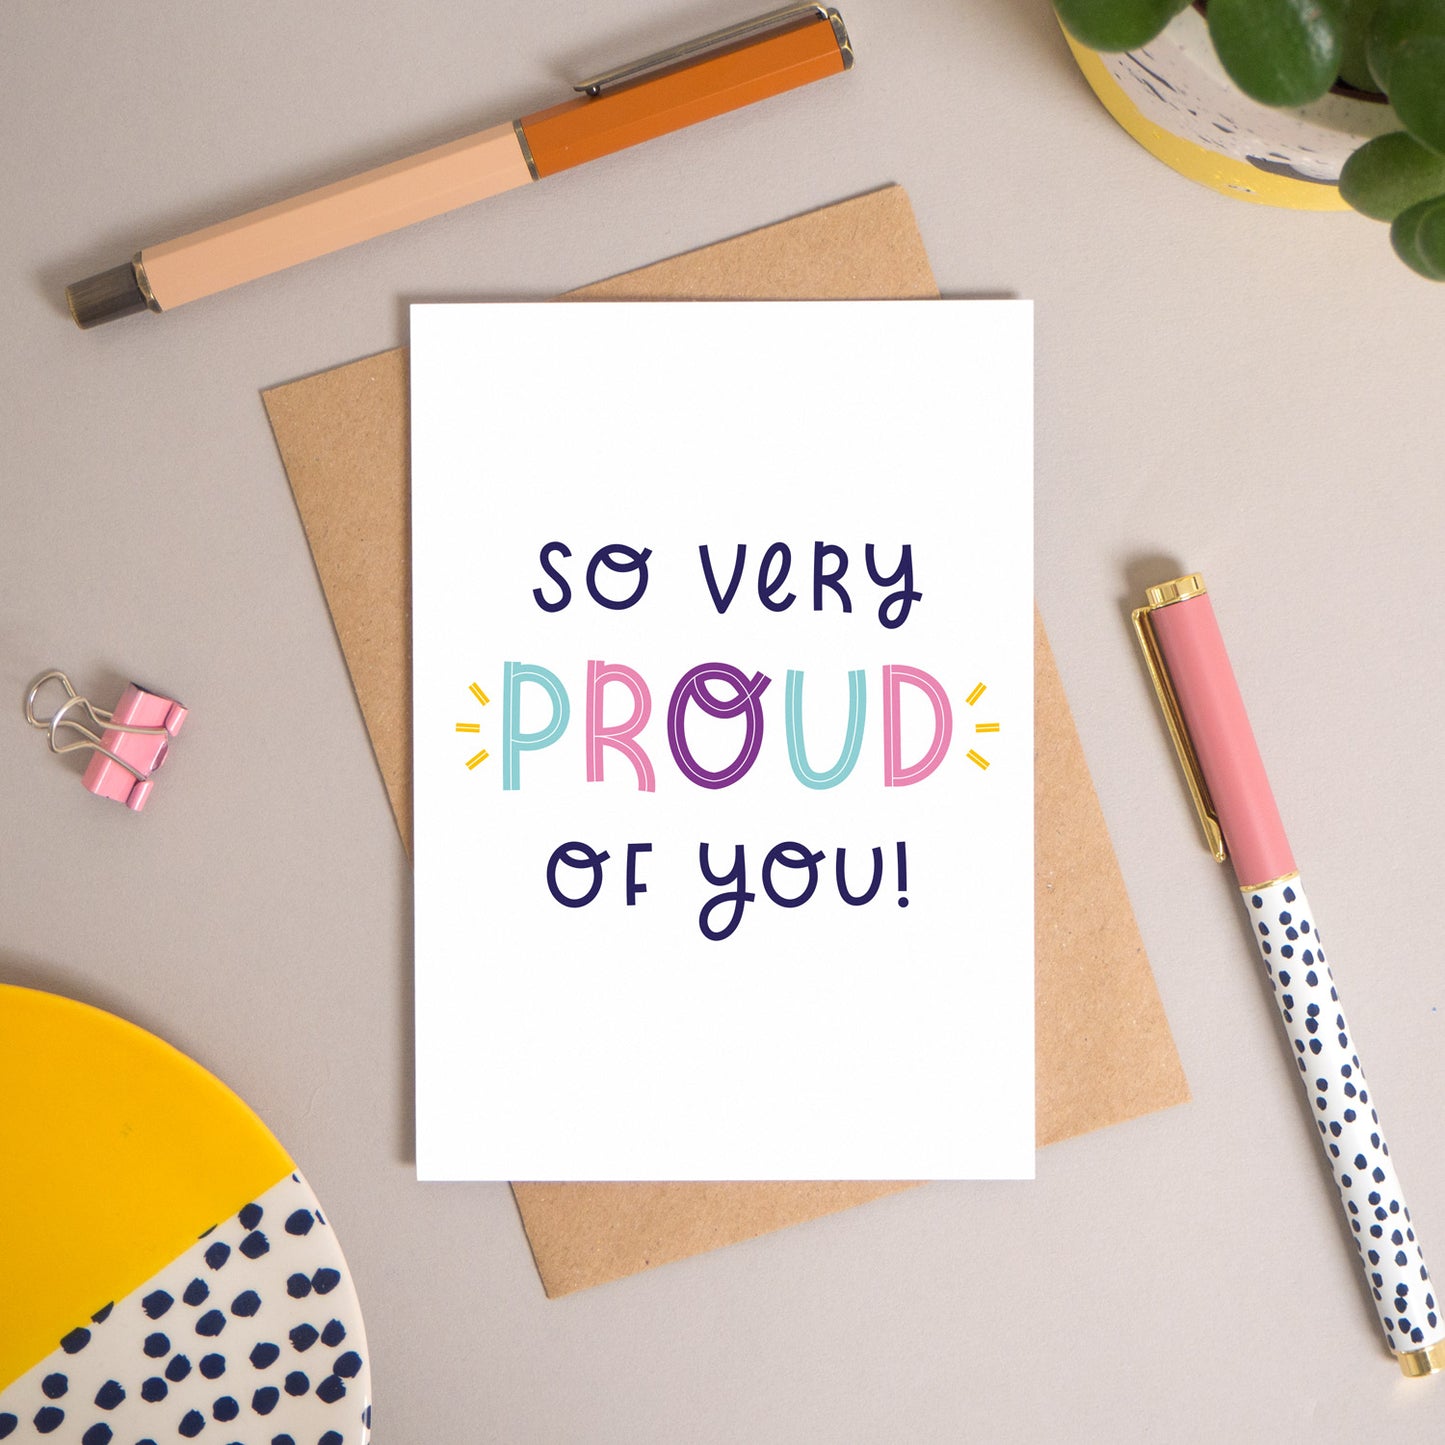 This ‘so very proud of you’ card has been shot flatlay style looking directly over the top of the card. It is lying flat on it’s kraft brown envelope, on a warm grey background. Surrounding the card are pens, a clip, a plant and a trinket dish. This version of the card is in varying tones of navy and pink, purple and blue.